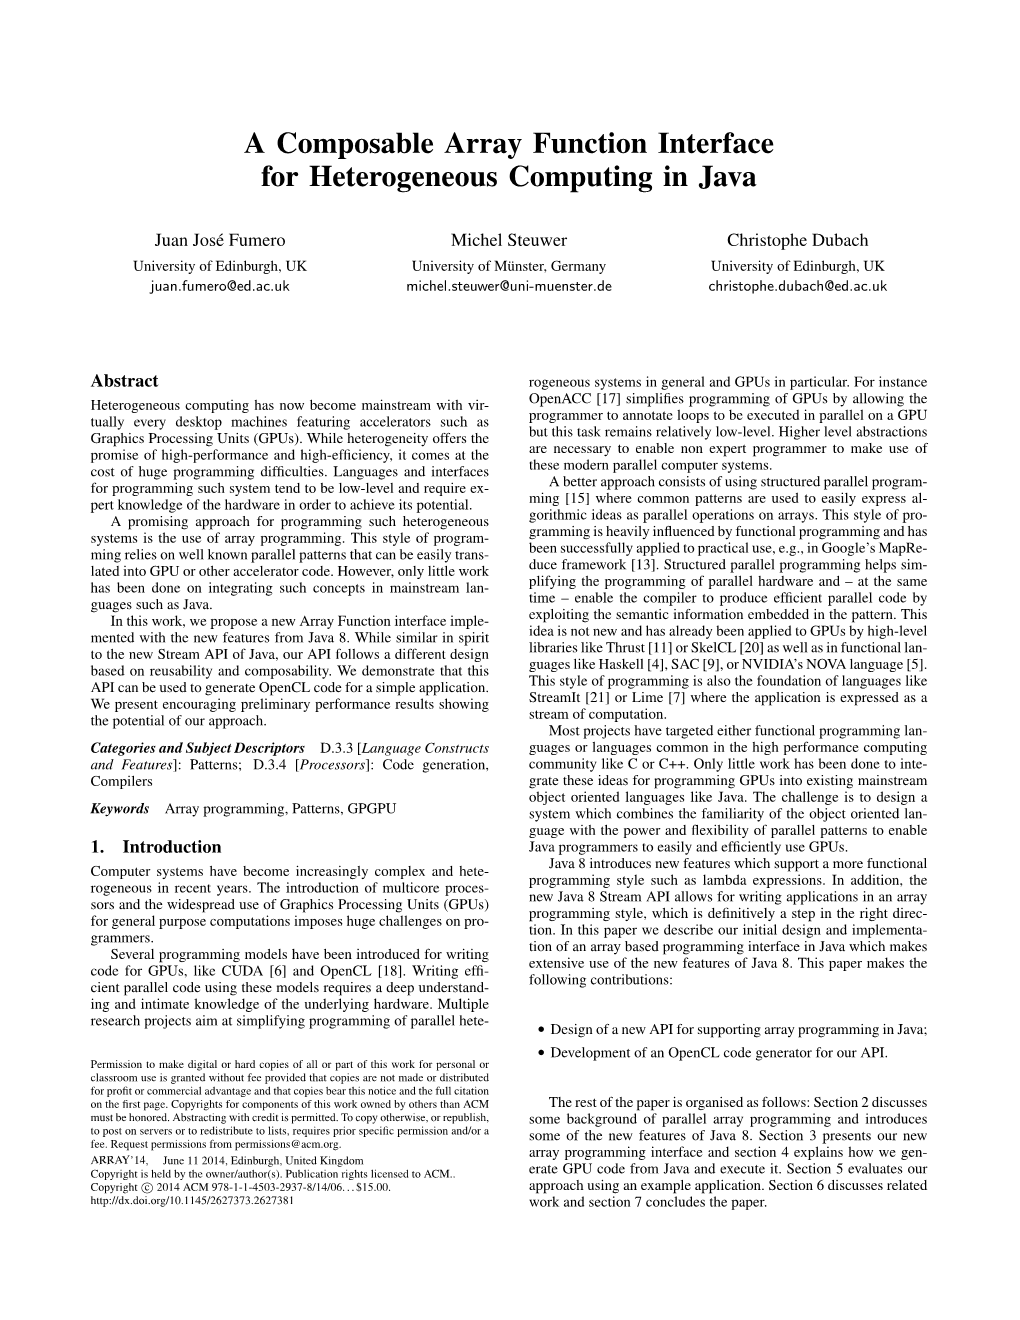 A Composable Array Function Interface for Heterogeneous Computing in Java